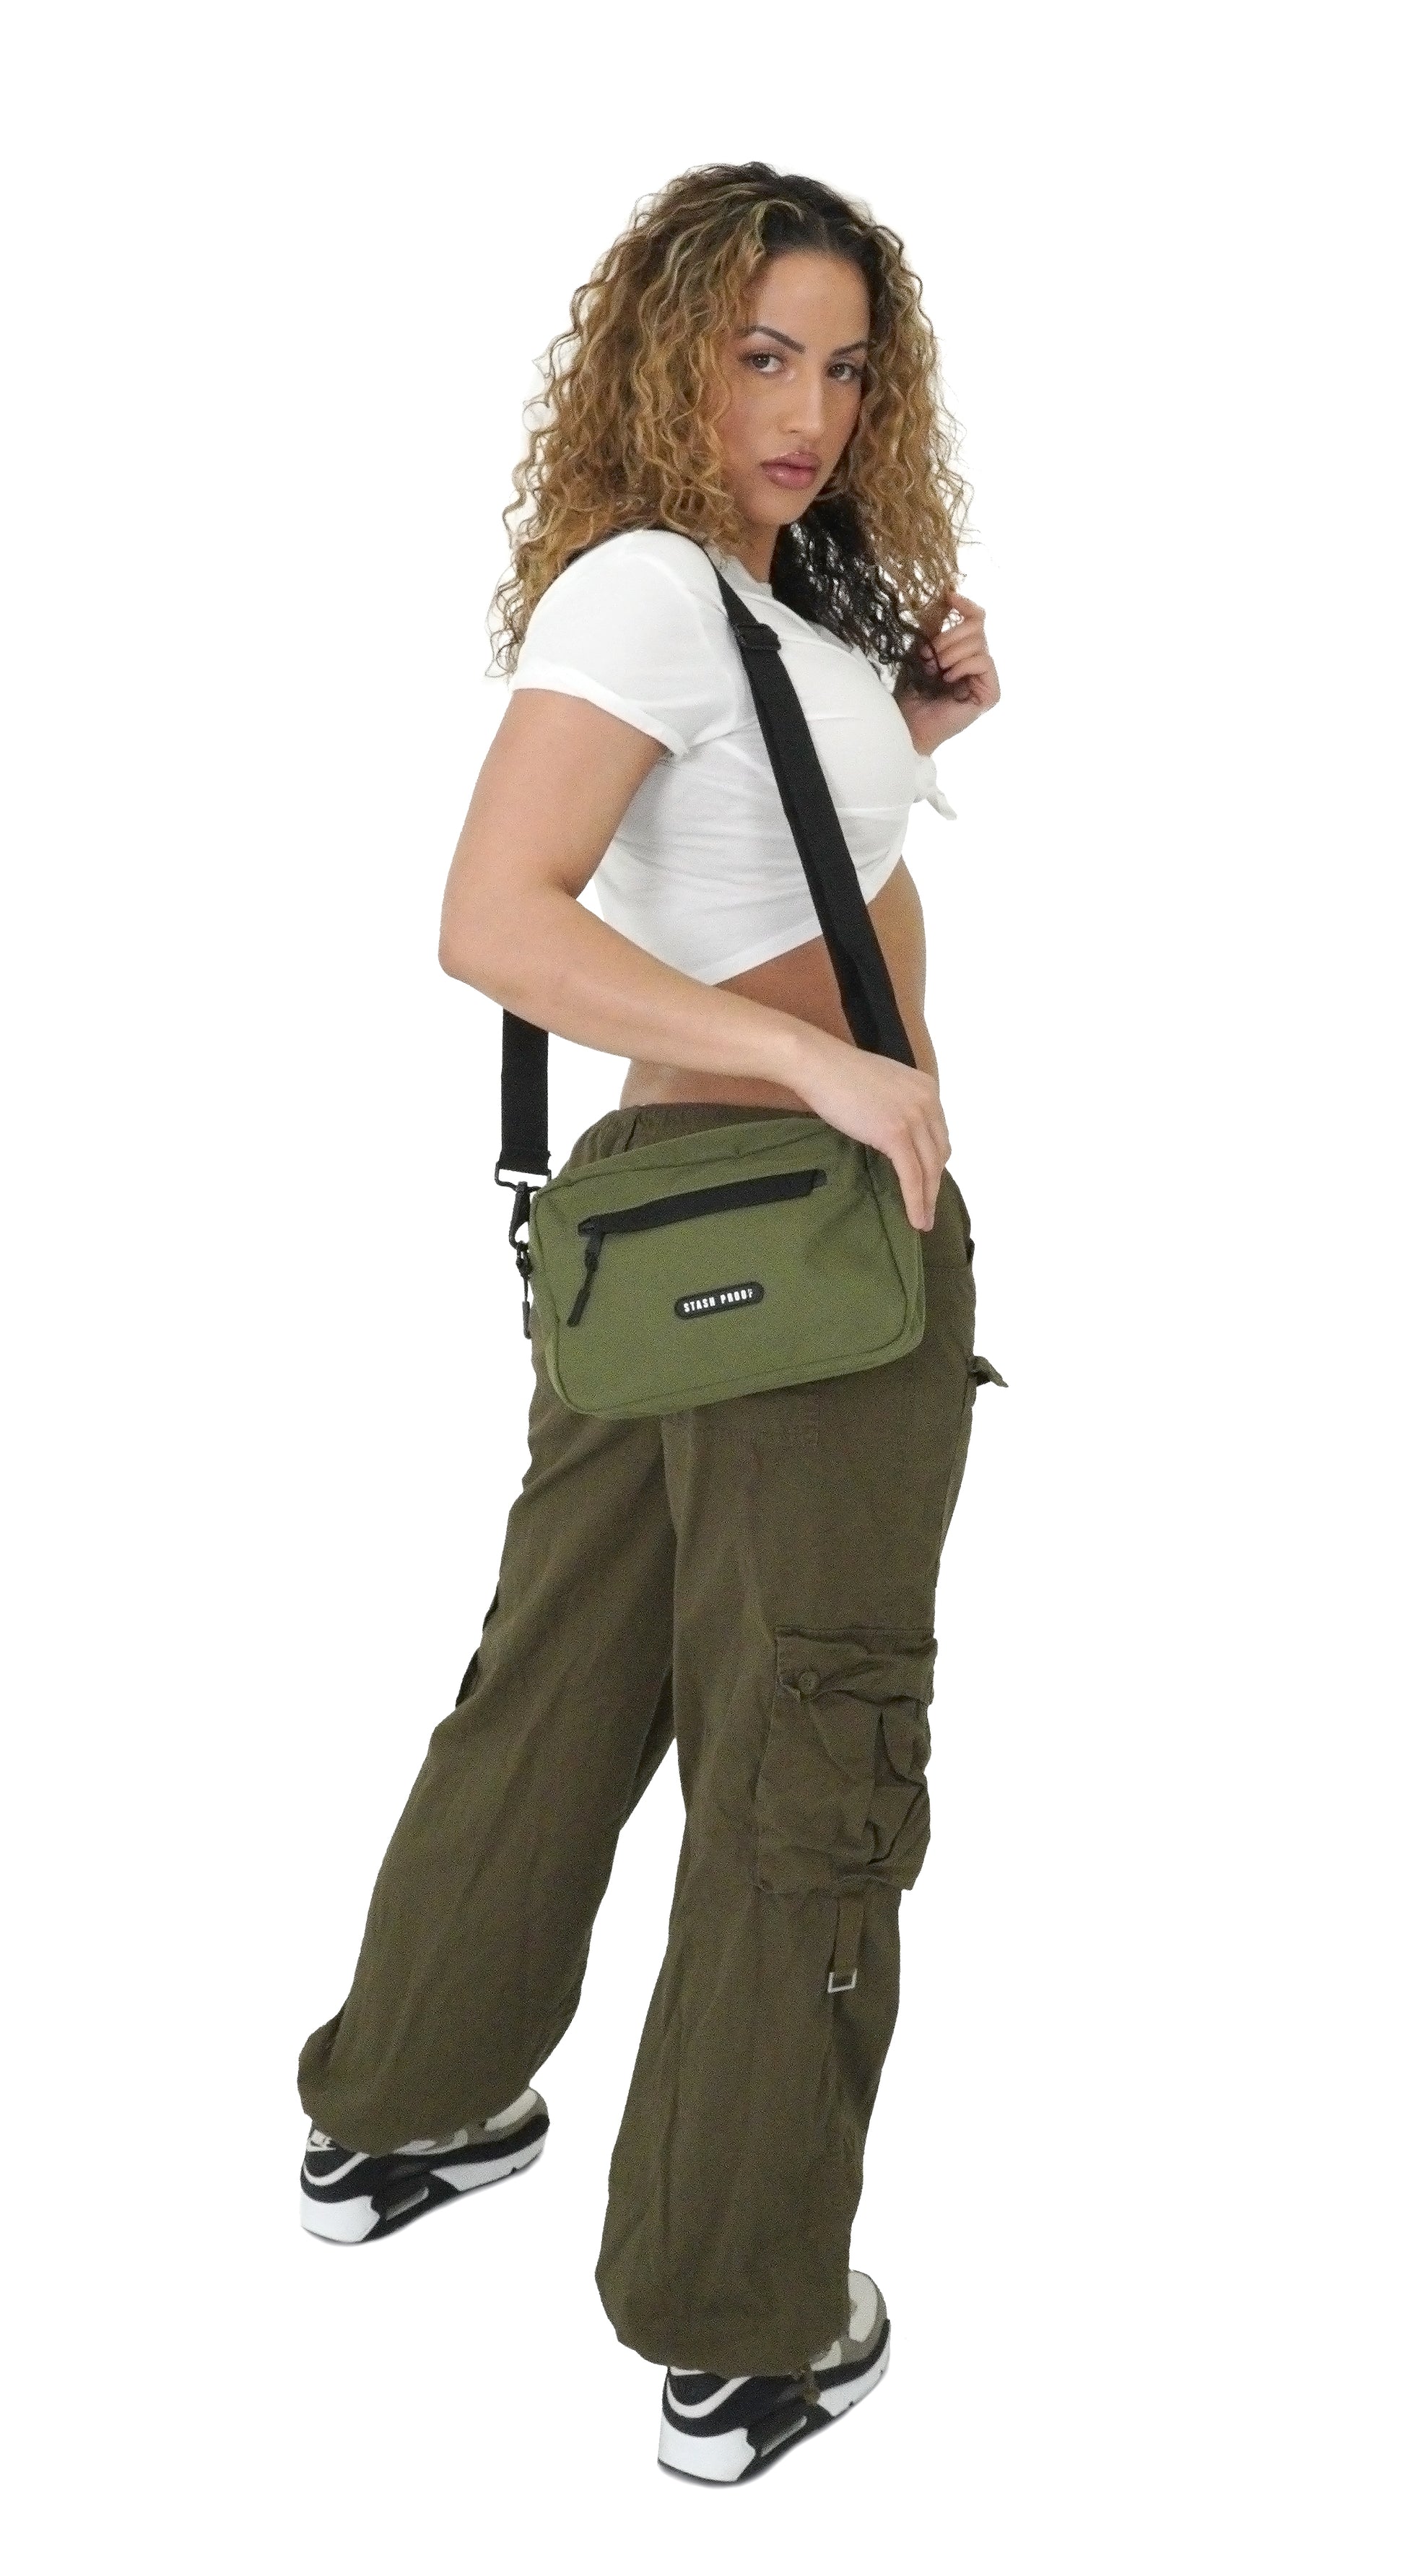 Female model with dark curly hair holding green Stash Proof smell proof Rover bag